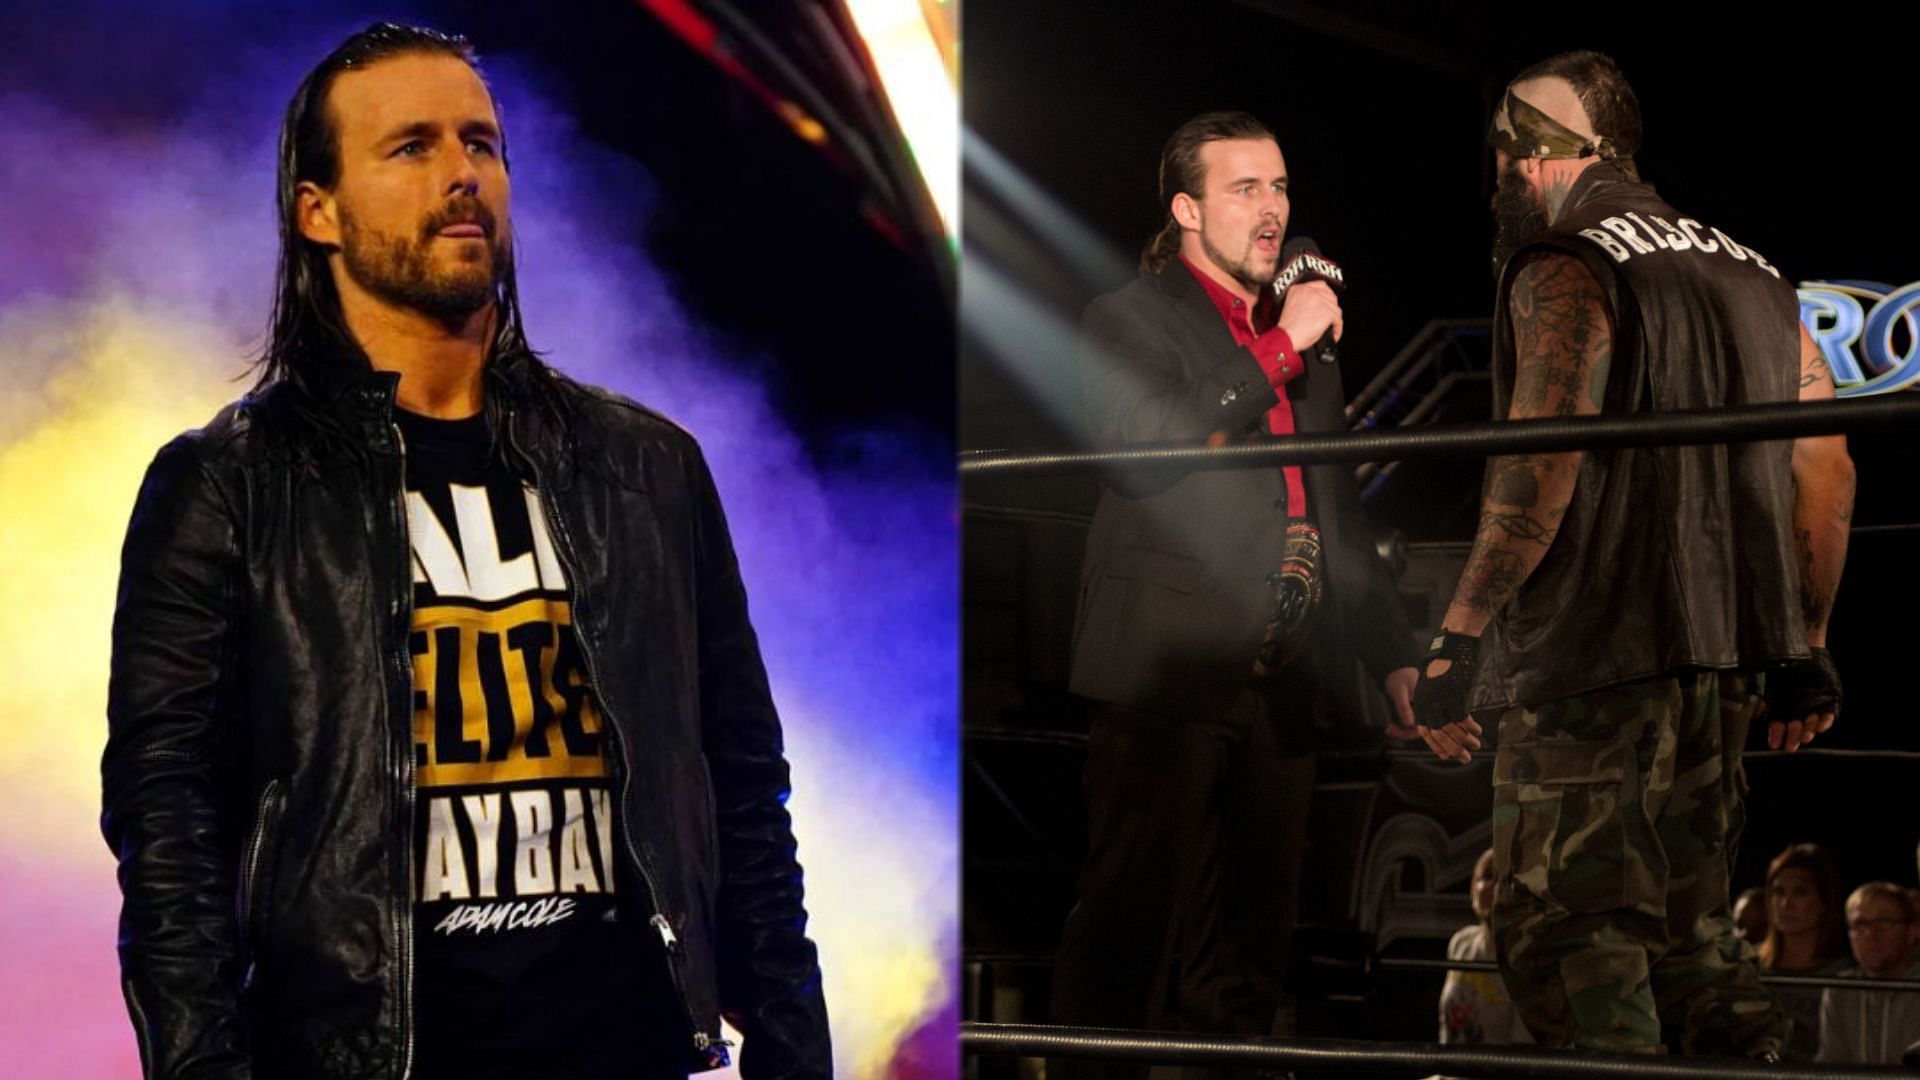 Adam Cole and Jay Briscoe stood face-to-face many times over the years.